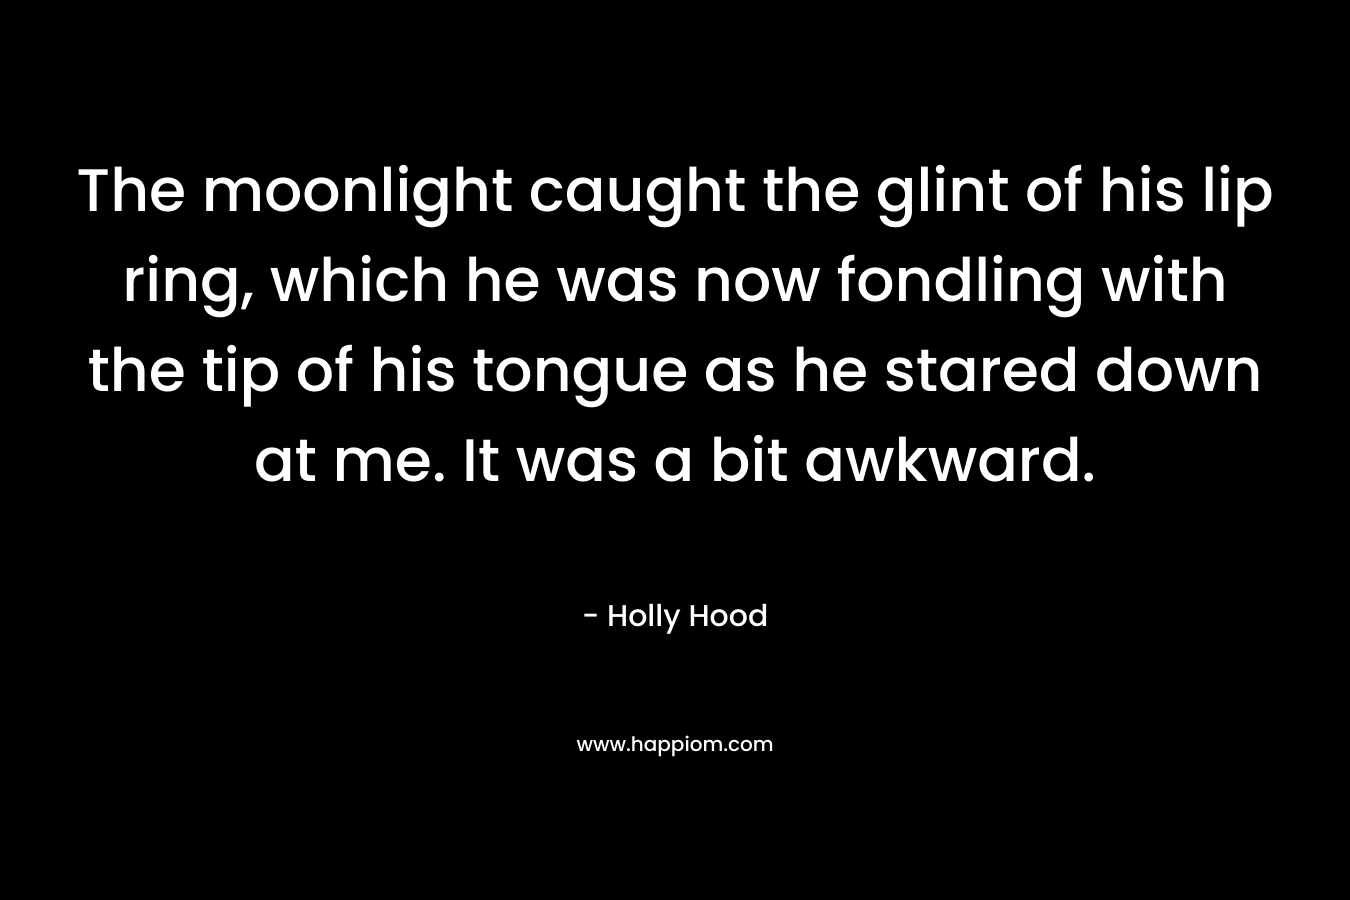 The moonlight caught the glint of his lip ring, which he was now fondling with the tip of his tongue as he stared down at me. It was a bit awkward. – Holly Hood